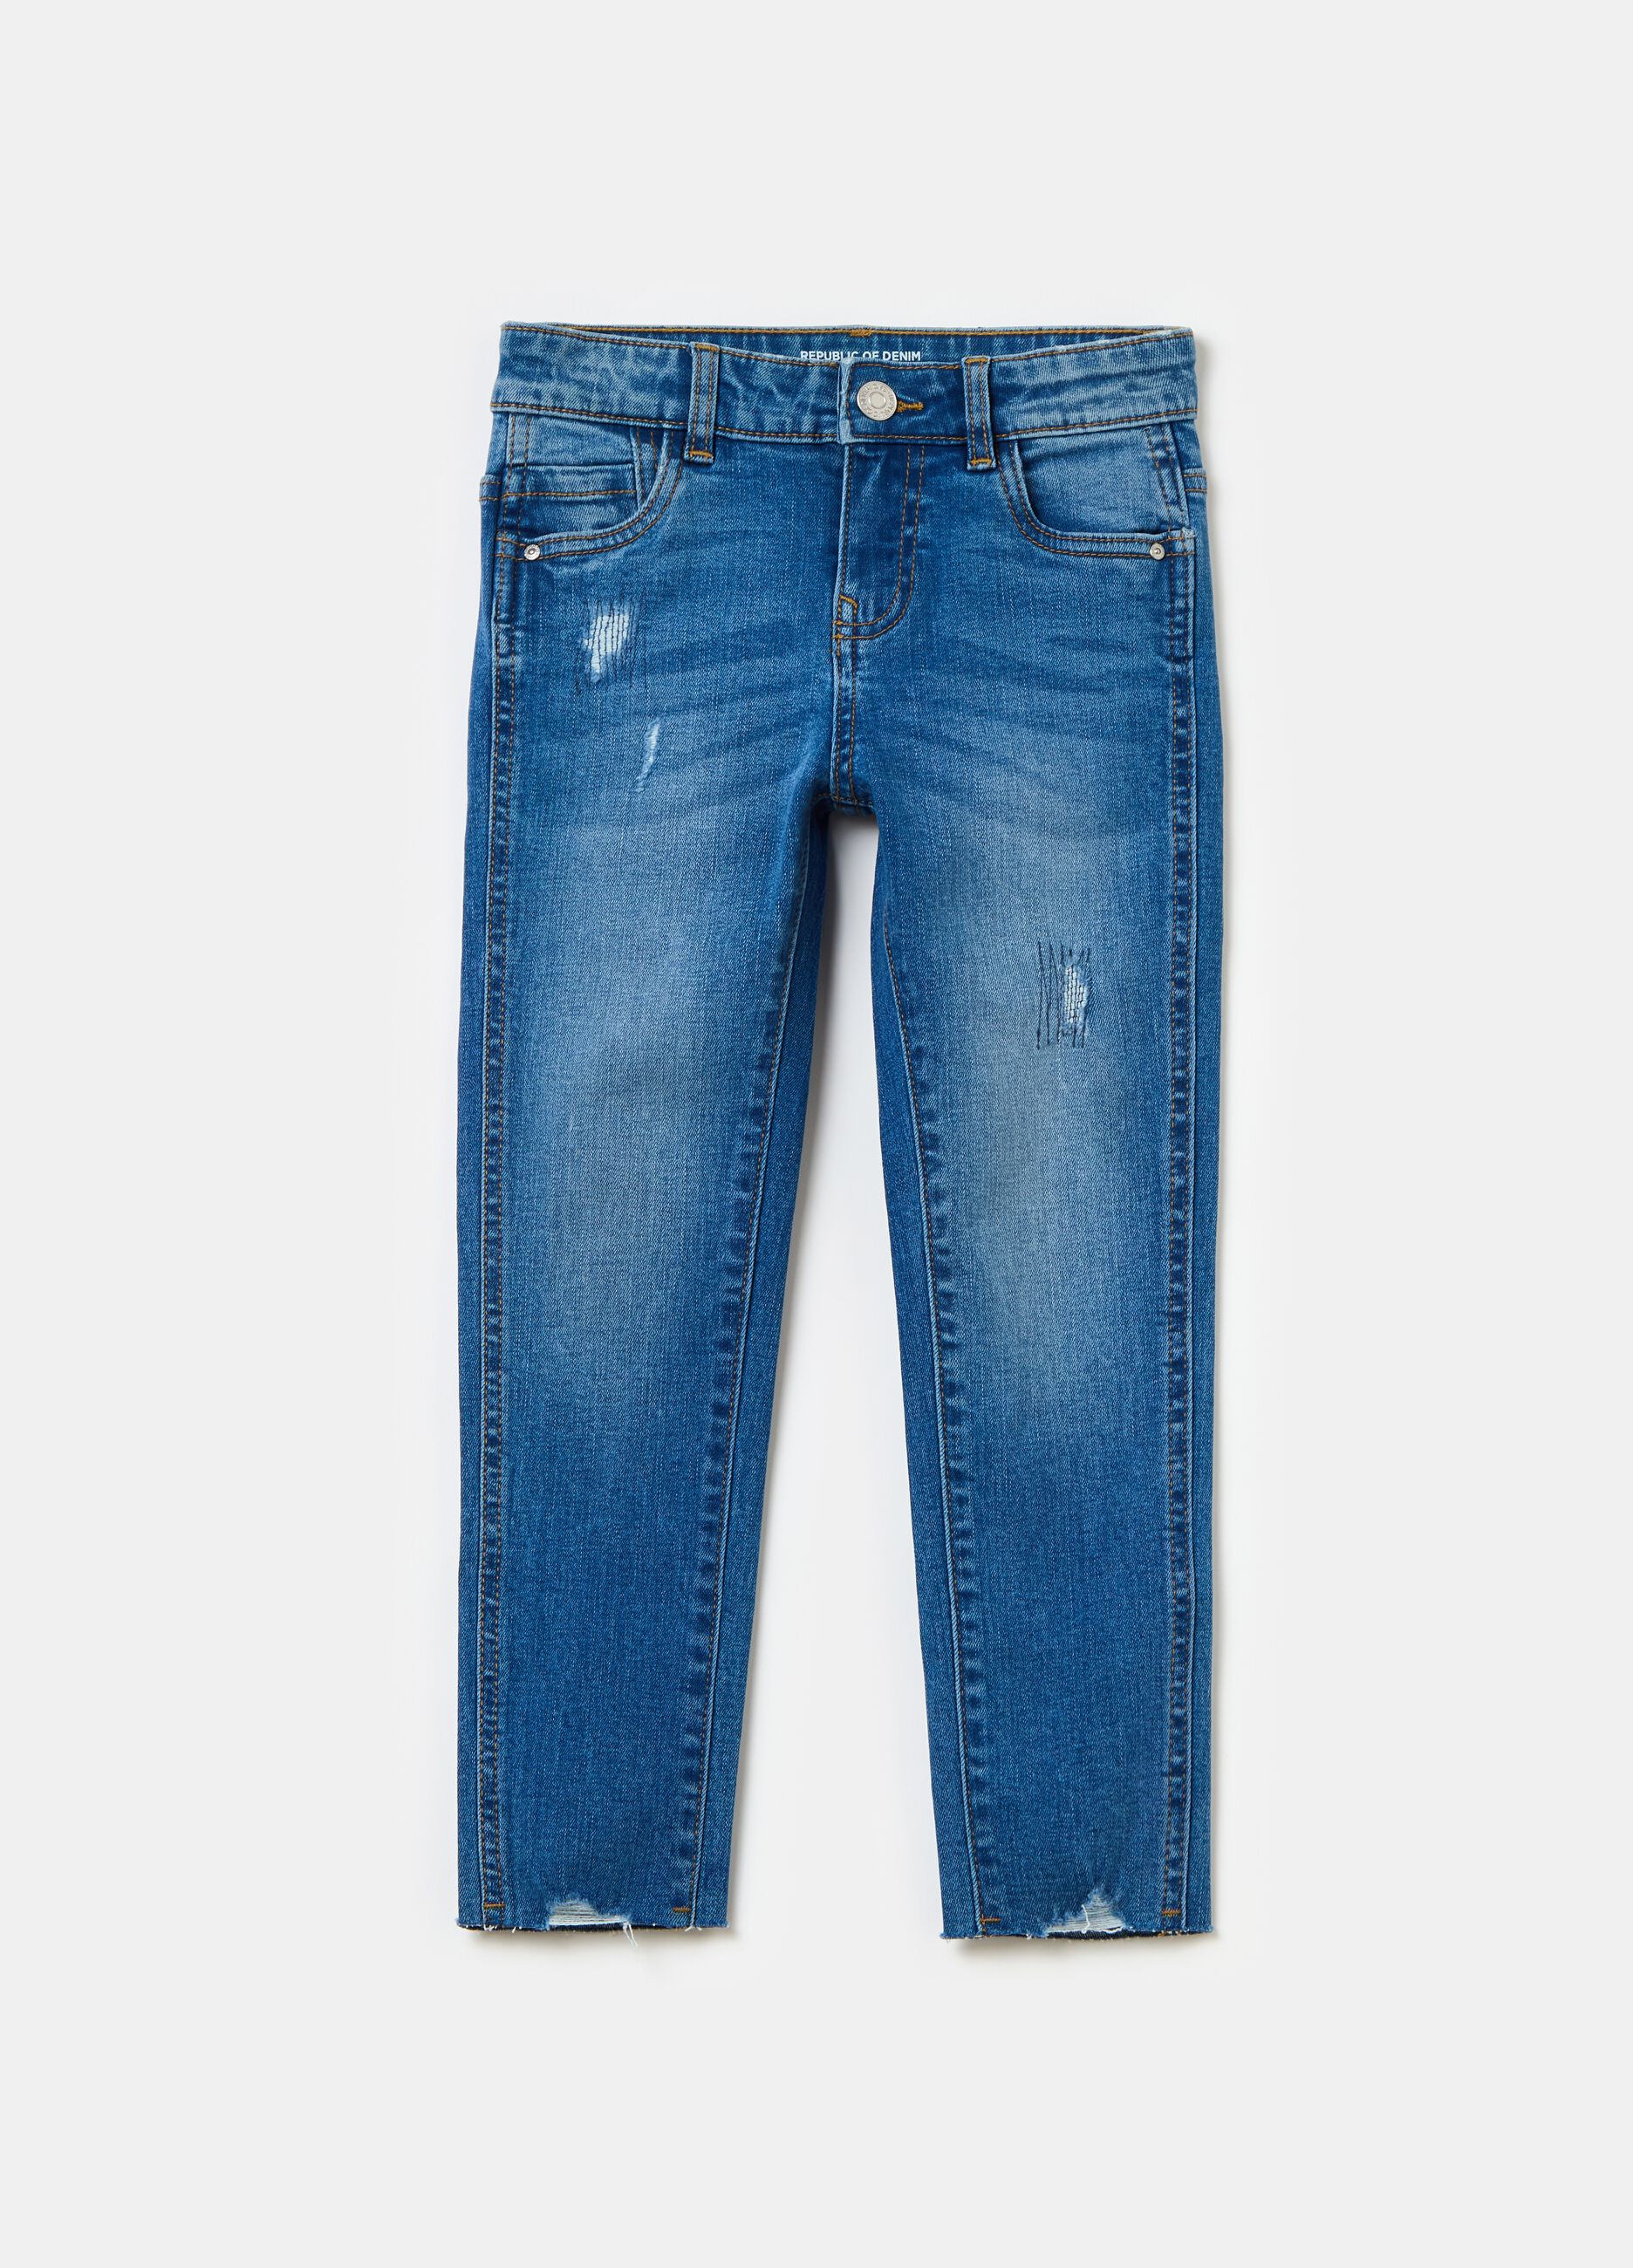 Skinny-fit jeans with abrasions